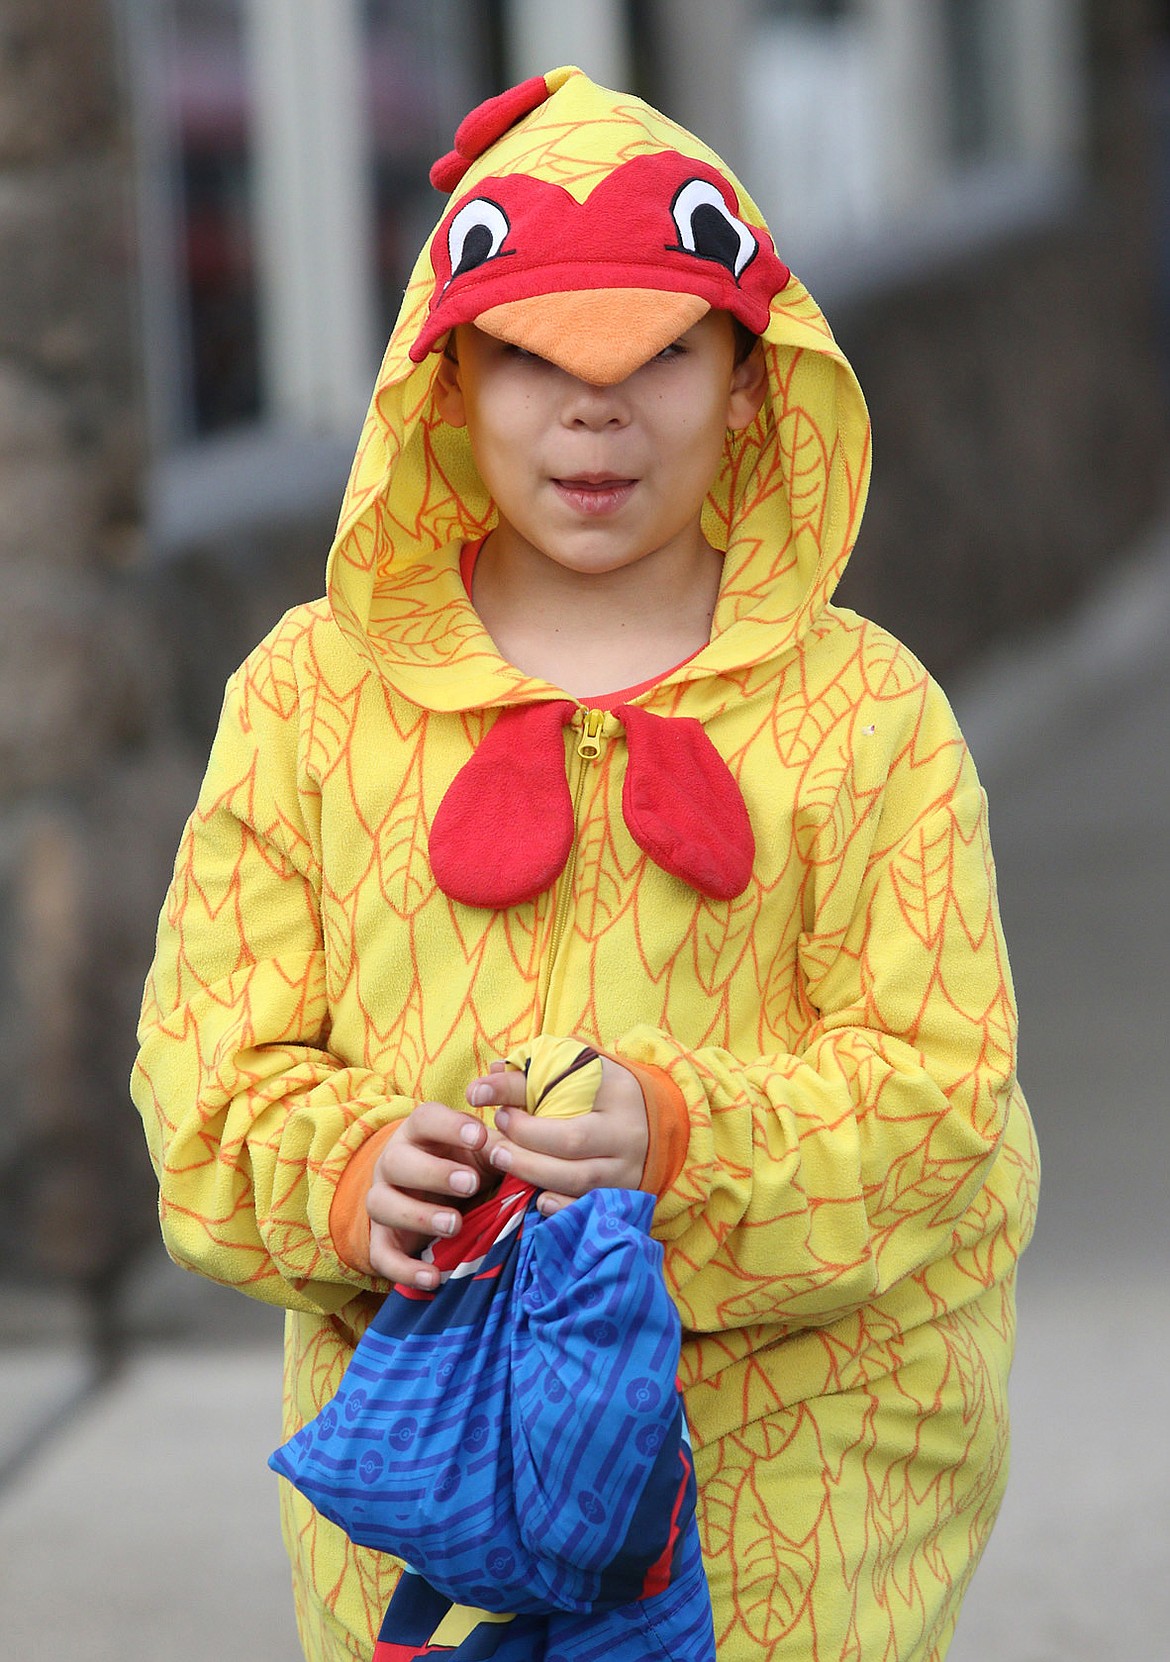 Dominic Condit, dressed as a chicken, crosses West 4th Street in Libby while trick-or-treating along Mineral Avenue Wednesday evening. (John Blodgett/The Western News)